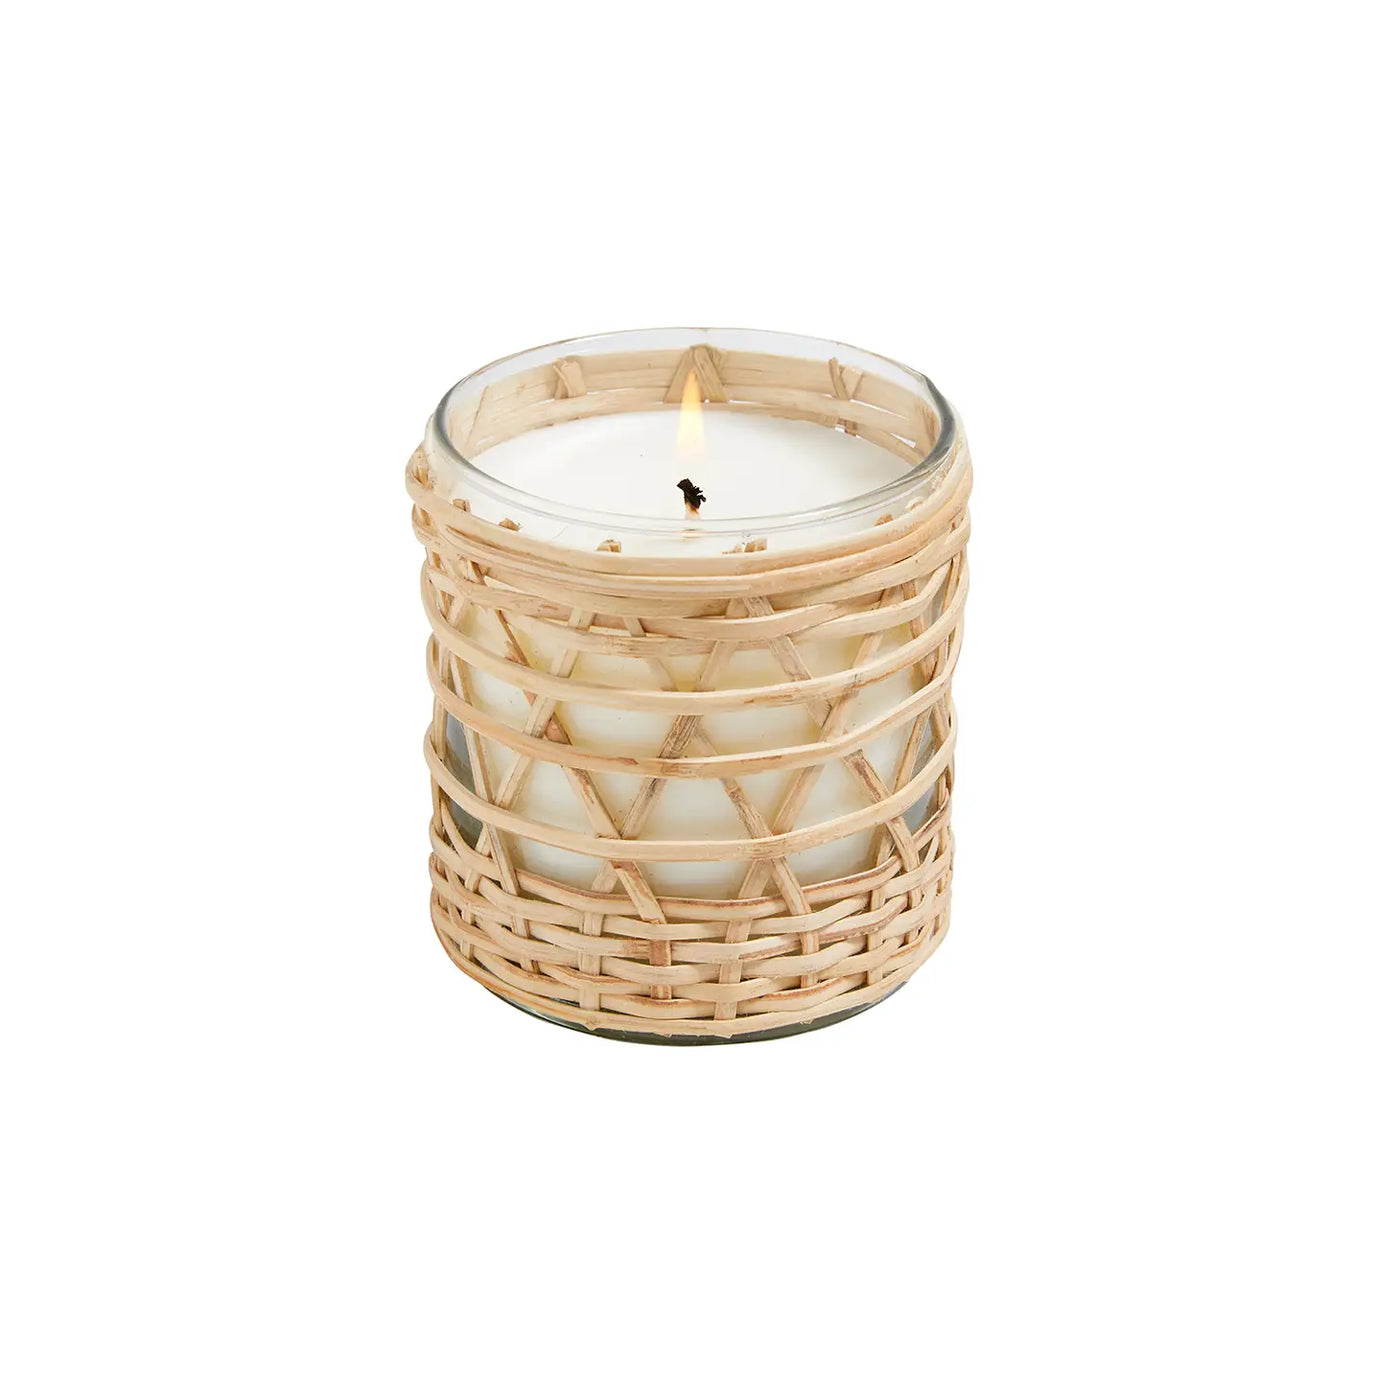 Citronella Eucalyptus Mint Bamboo Wrapped Candle 7oz.